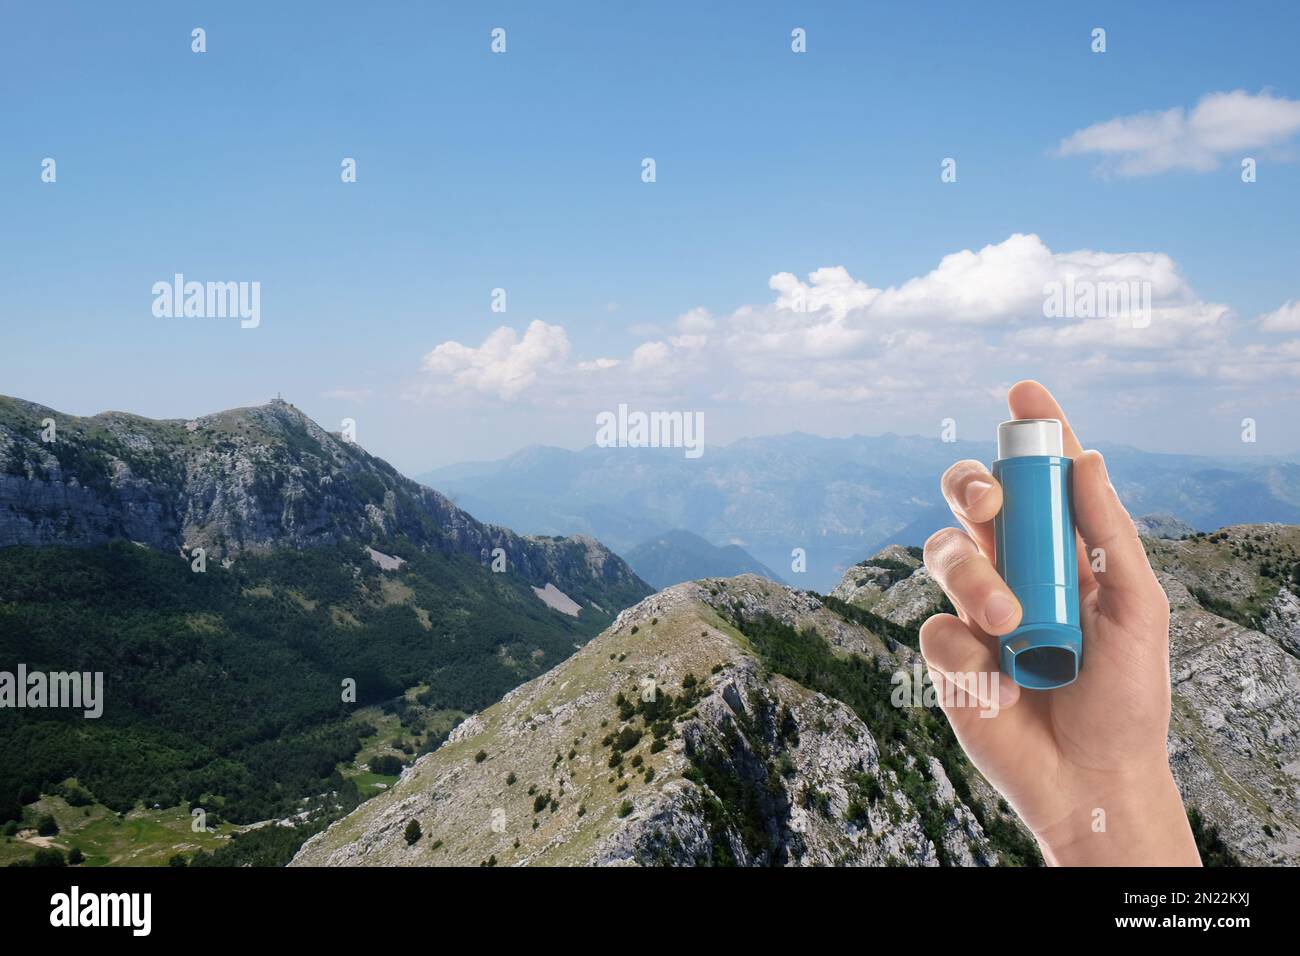 Man with asthma inhaler in mountains, closeup. Emergency first aid during outdoor recreation Stock Photo